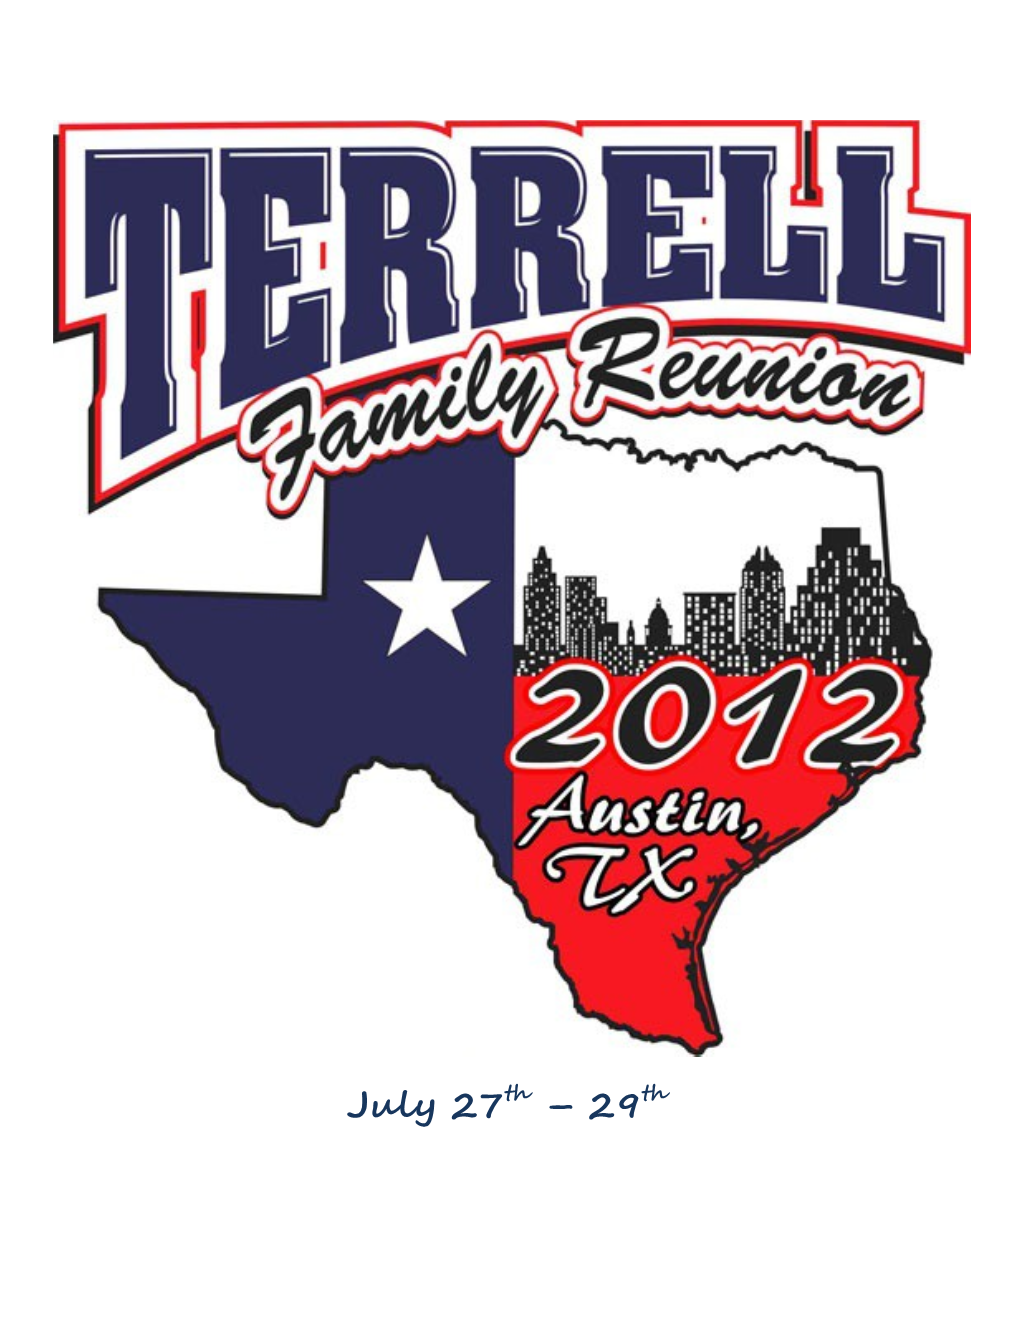 Family Reunion Registration Packet